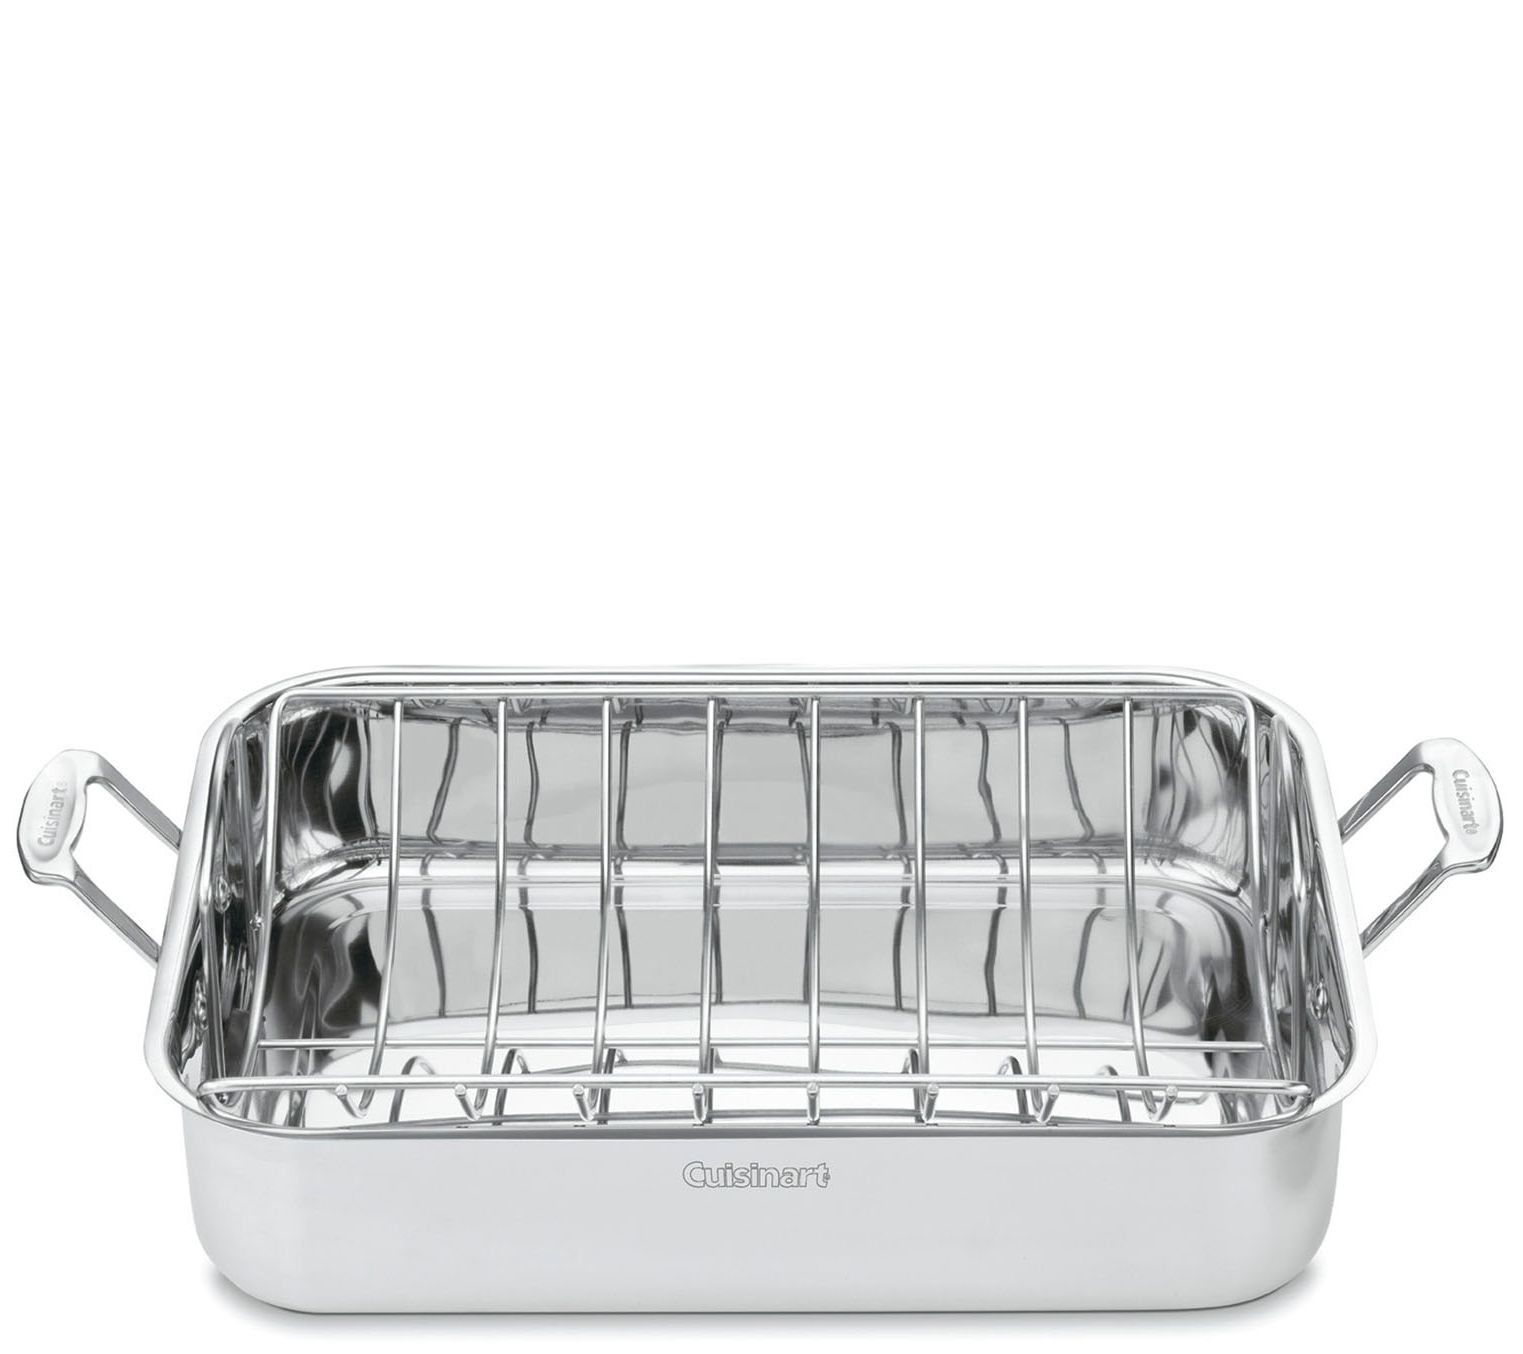 The Cuisinart Stainless Roasting Pan, Reviewed